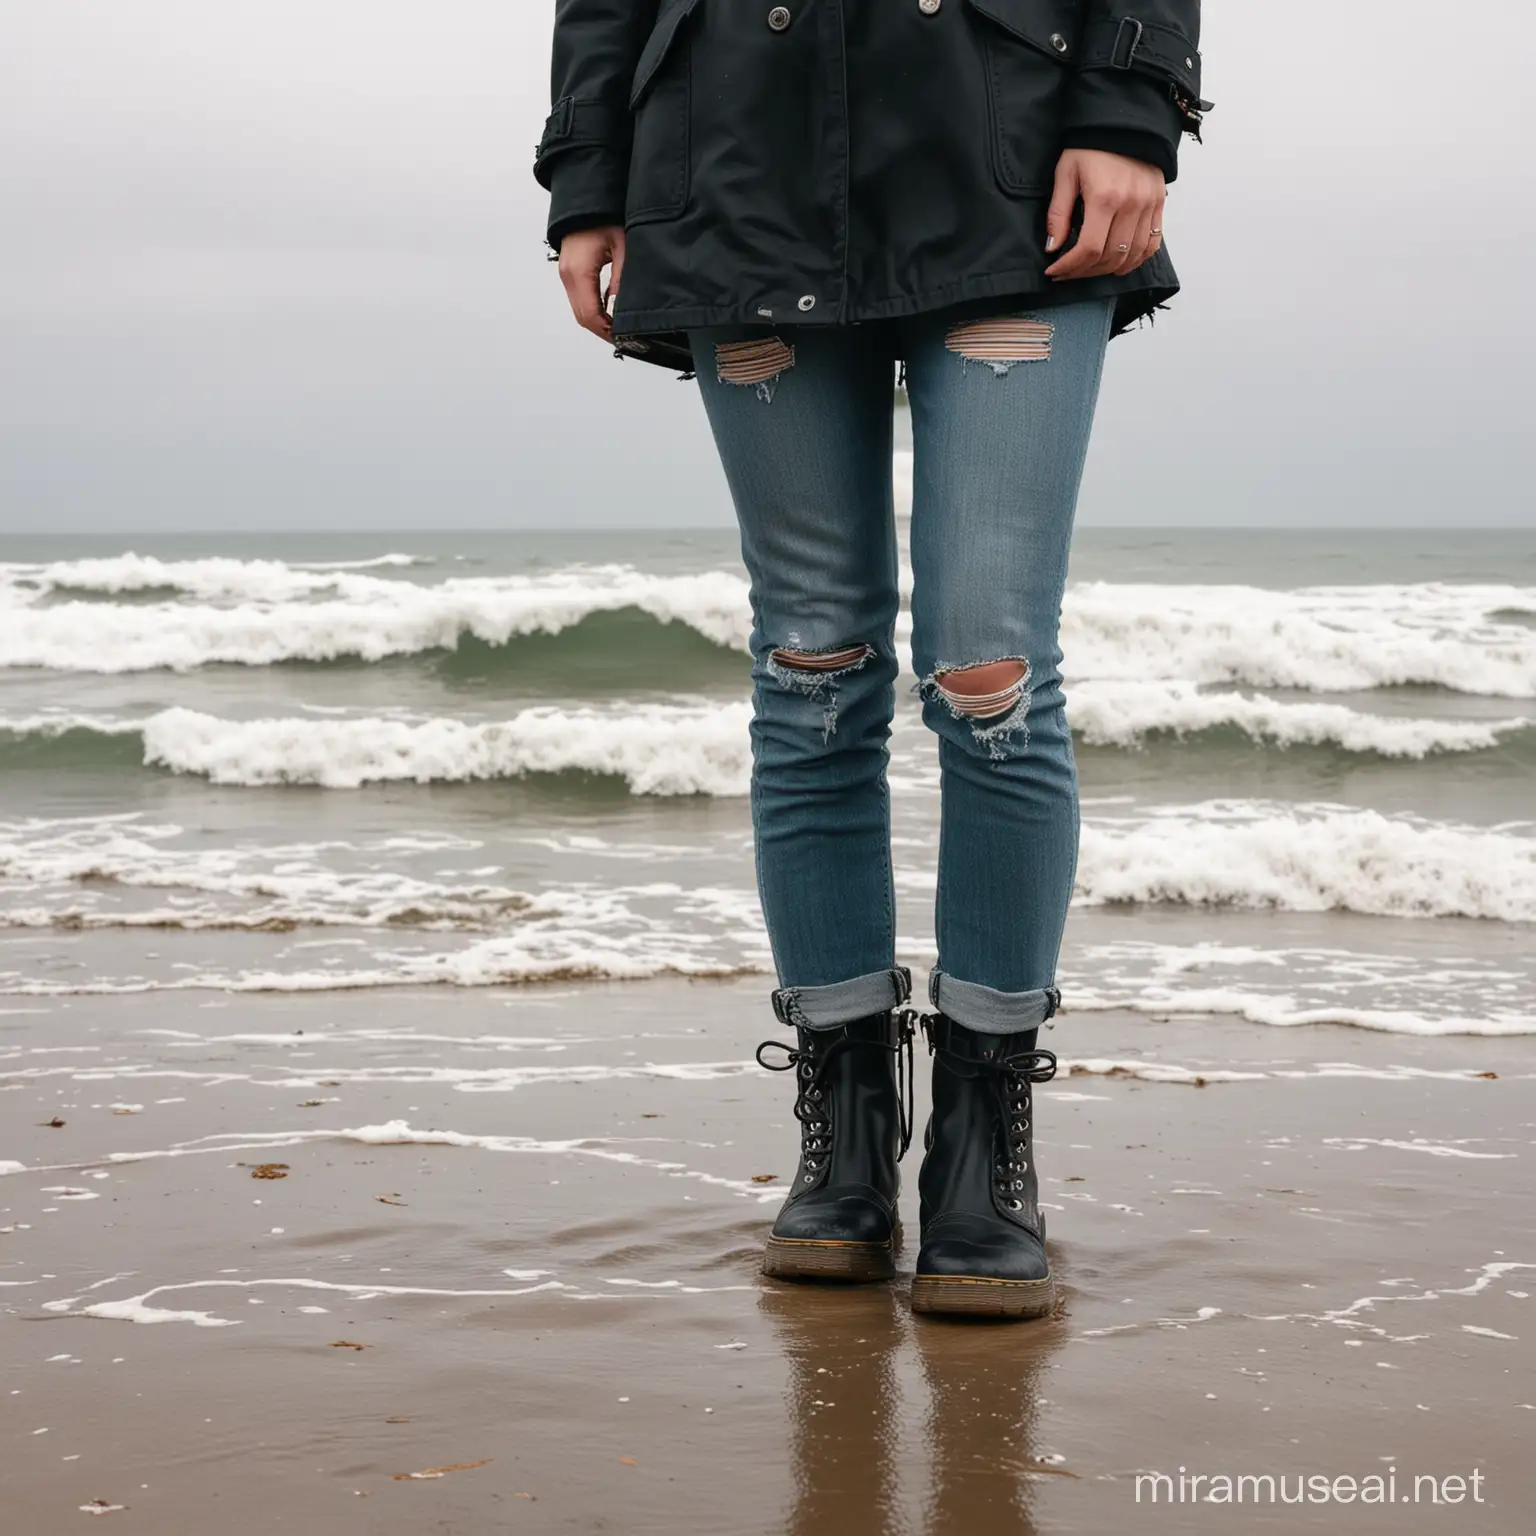 Woman staring out into ocean from beach wearing doc Martin boots,black oea coat, and ripped jeans full body rear view 